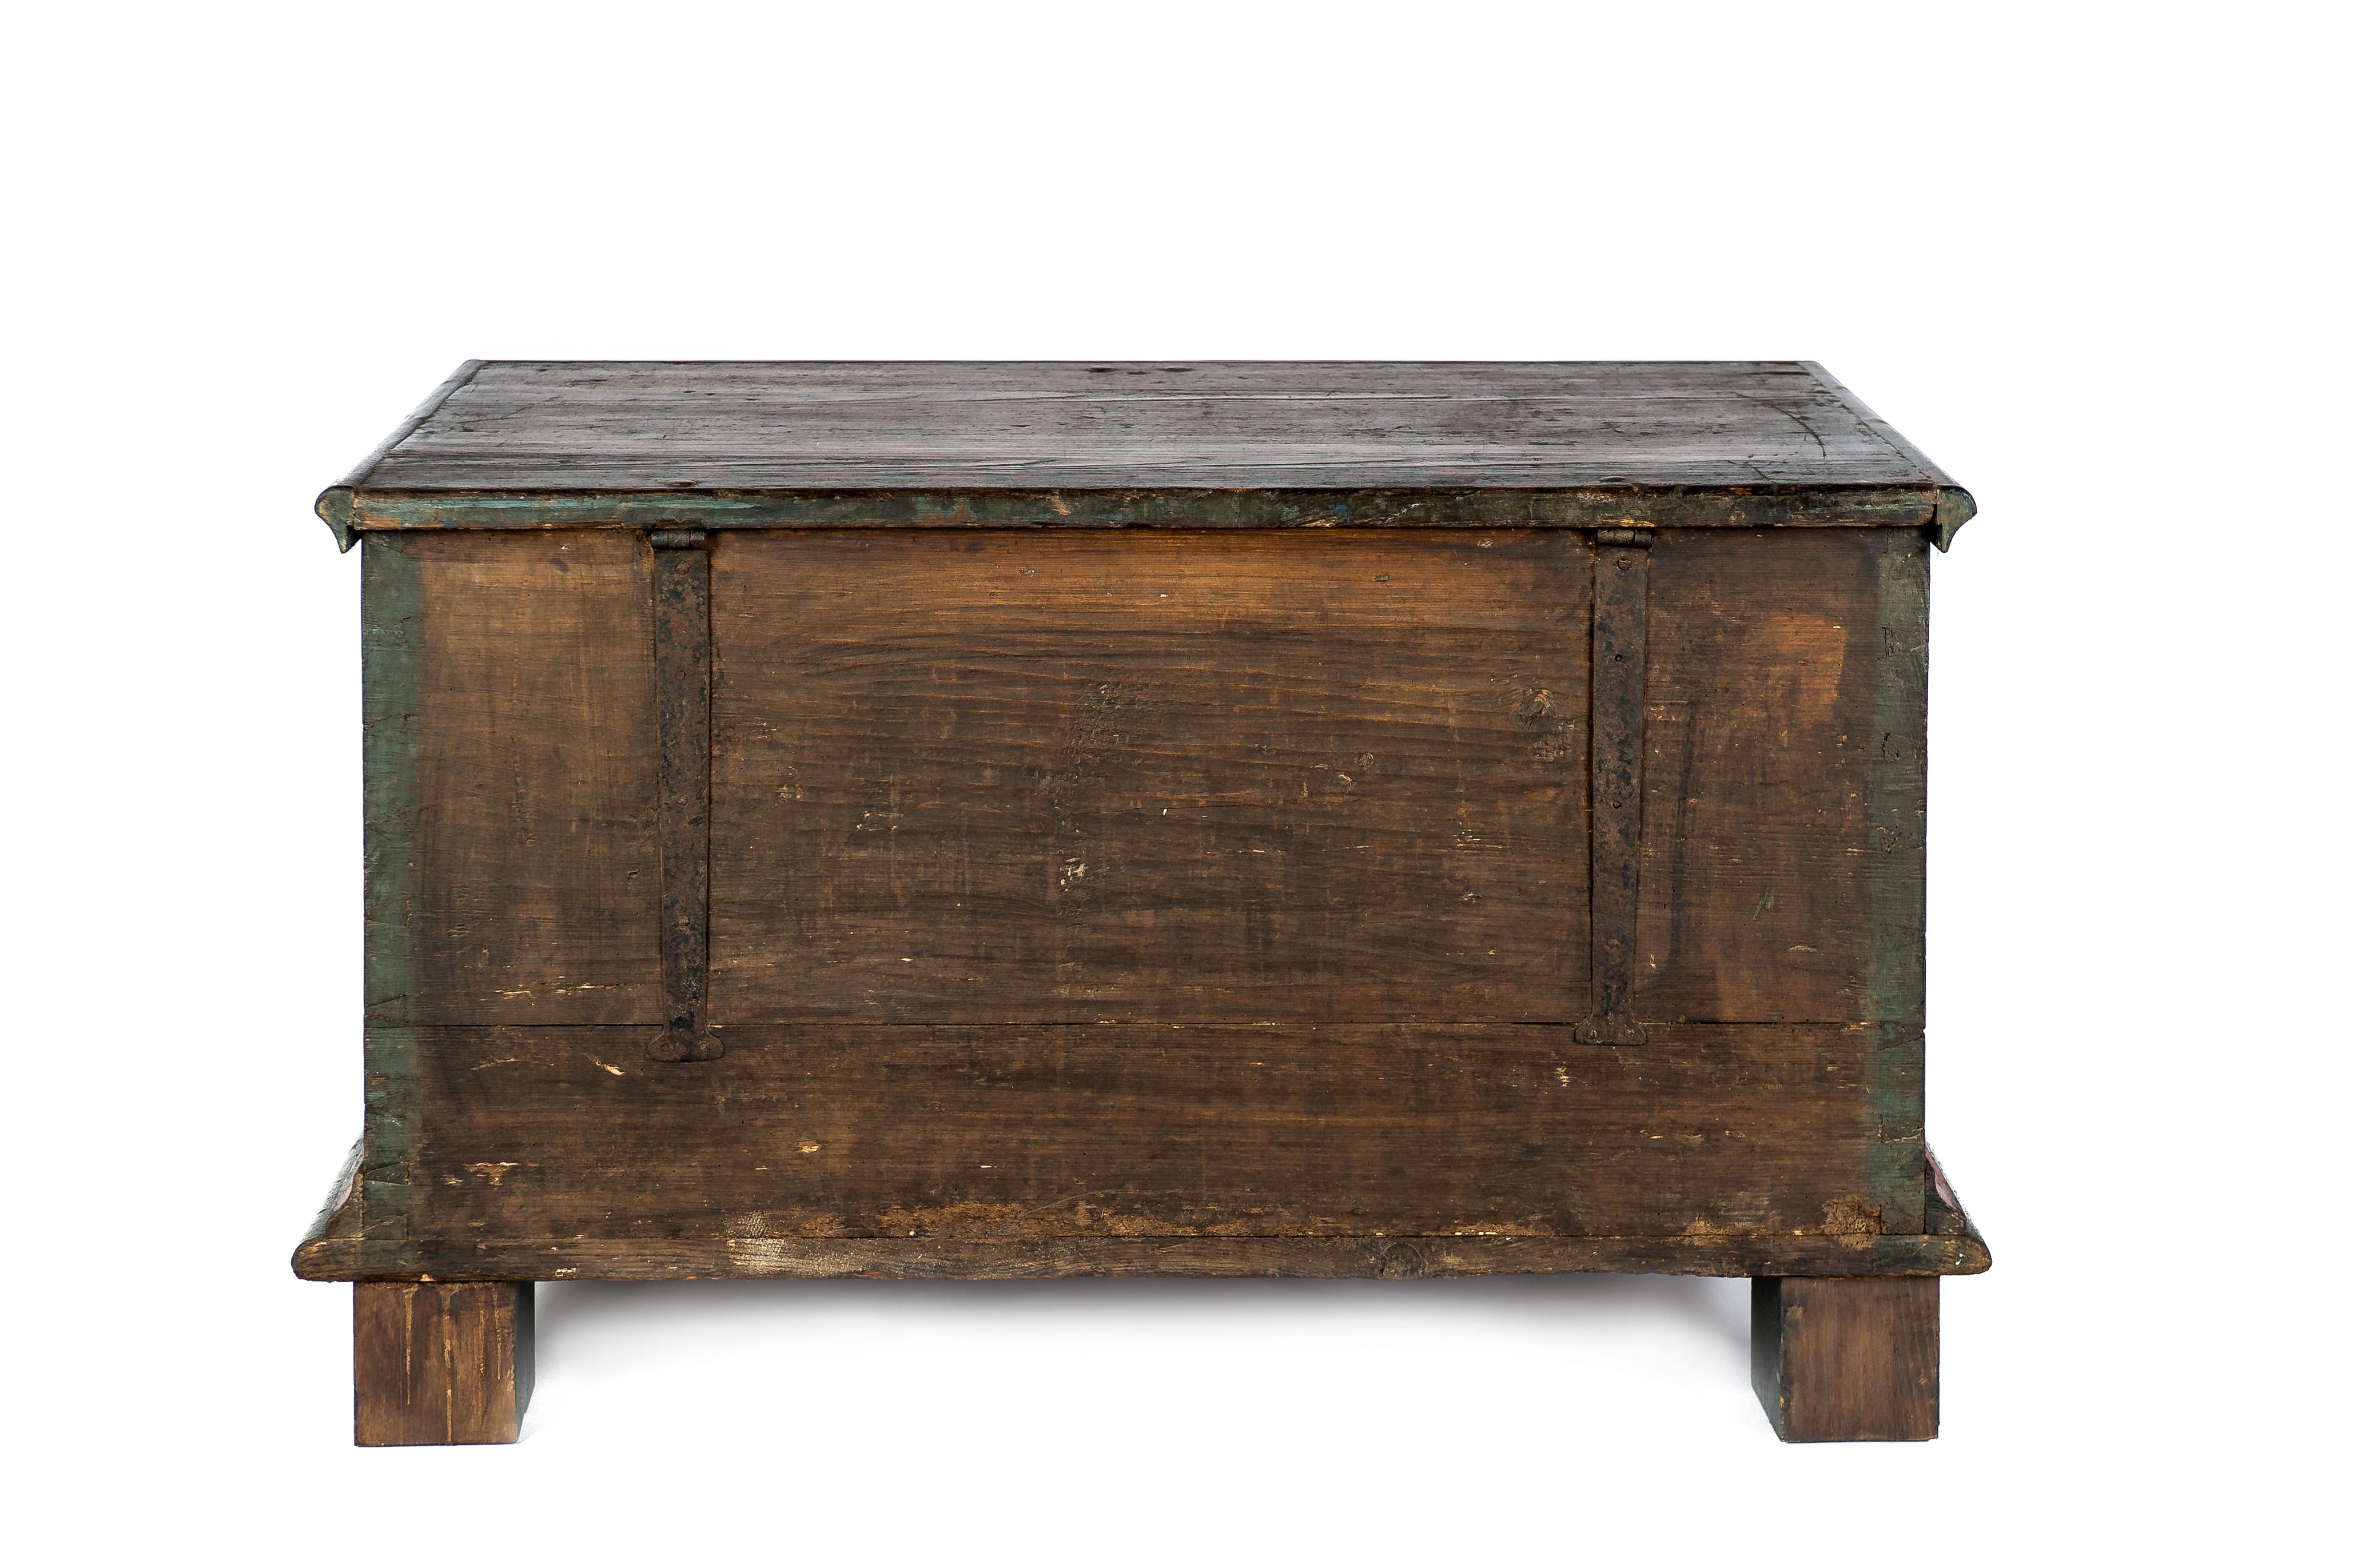 Steel 18th-Century Solid Pine and Traditional Painted Rural Bohemian Trunk or Chest